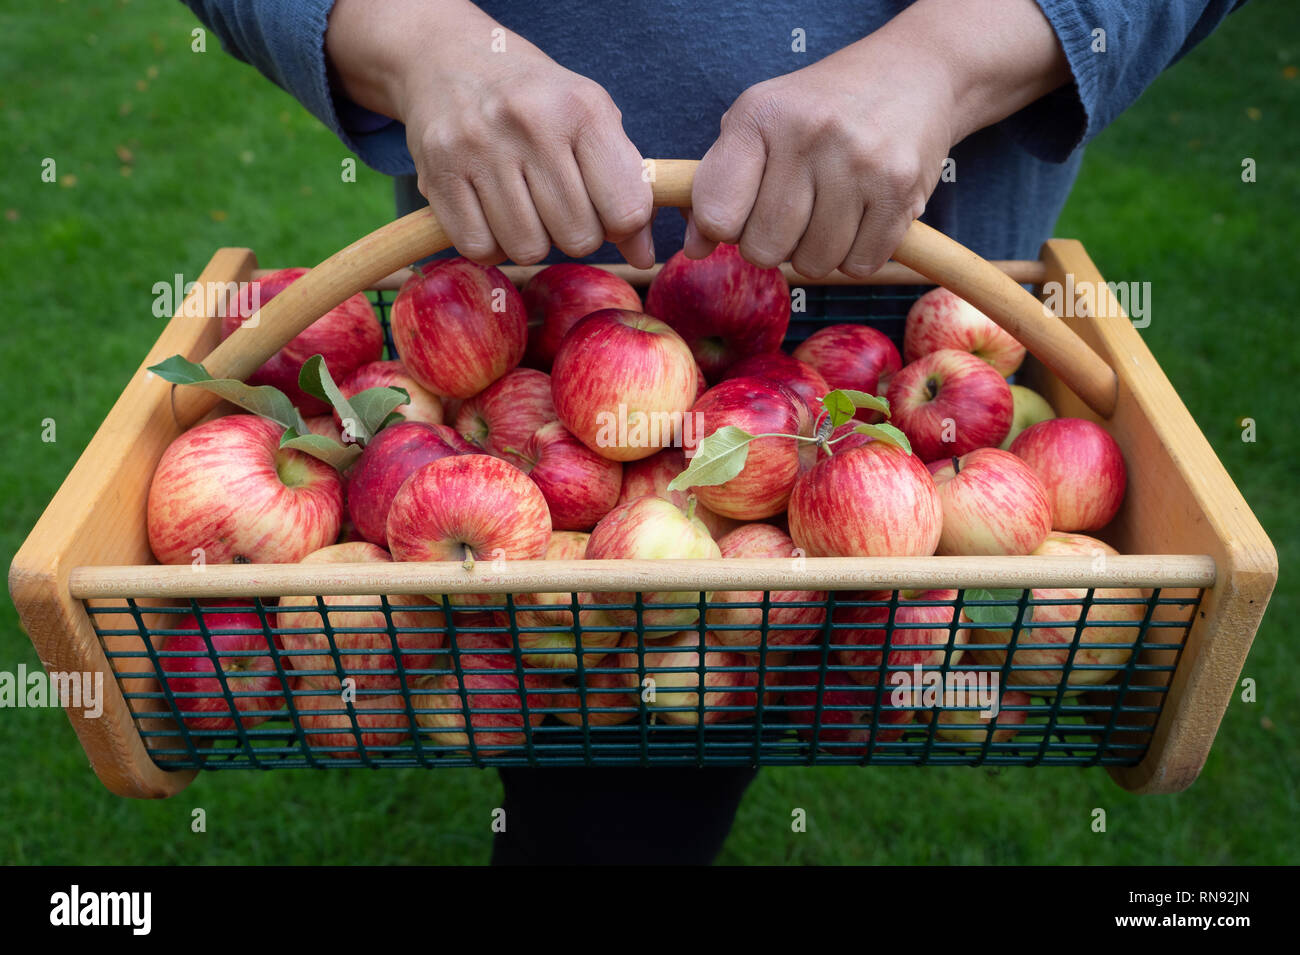 Close up of a woman's hands holding a wod and wire basket full of freshly picked red and yellow apples. Stock Photo